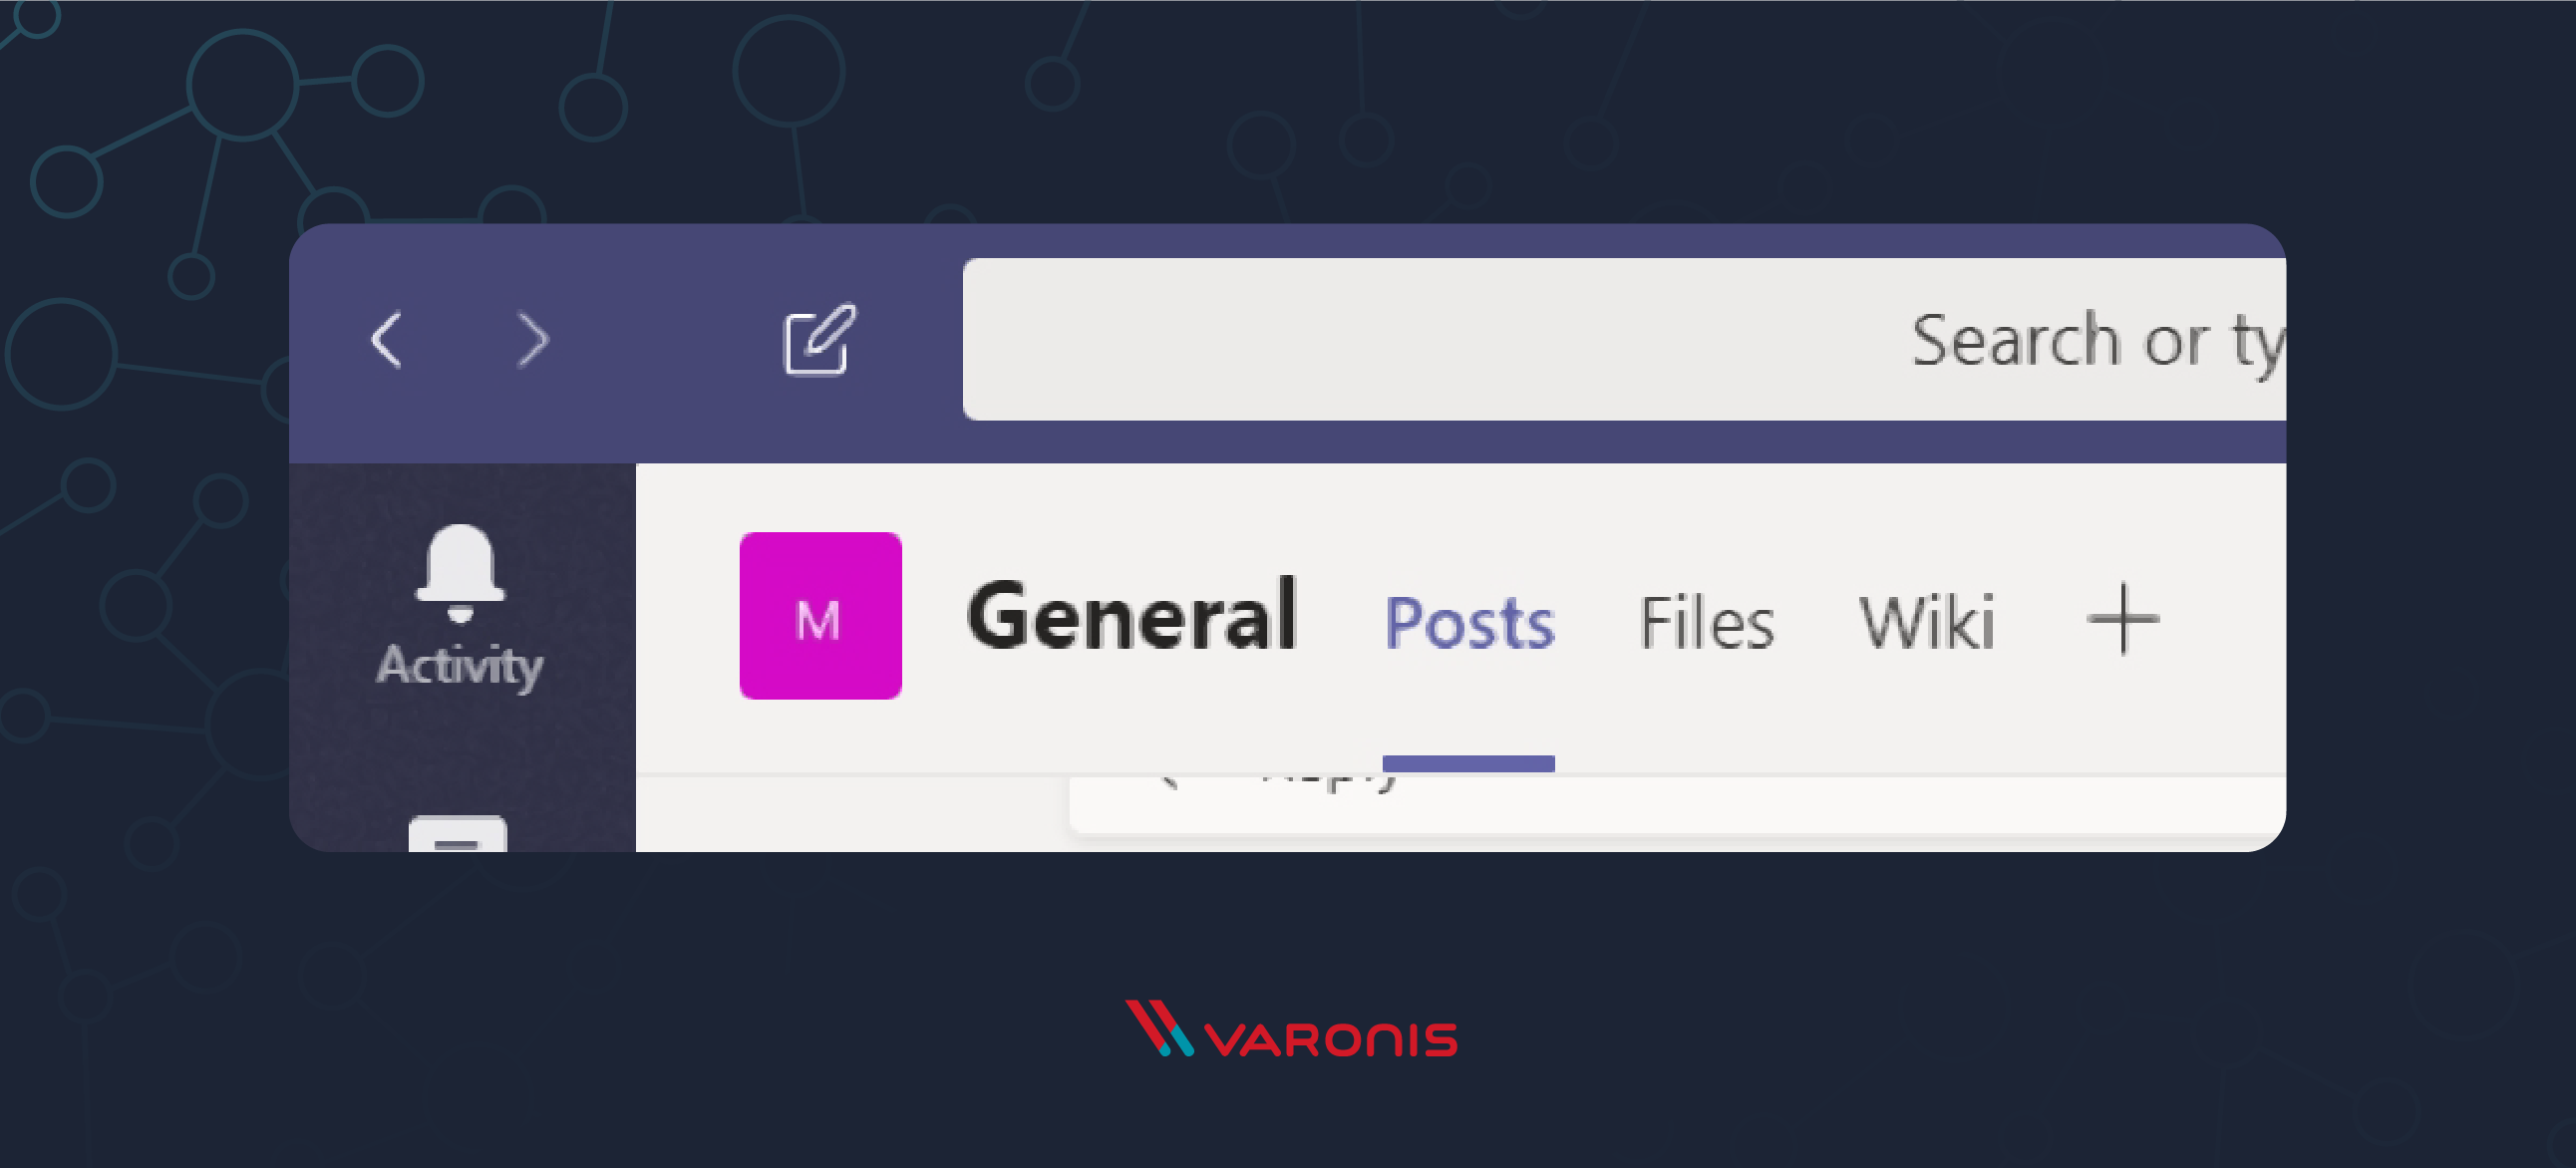 An image of the available drop down channels featuring general, posts, files, and wiki